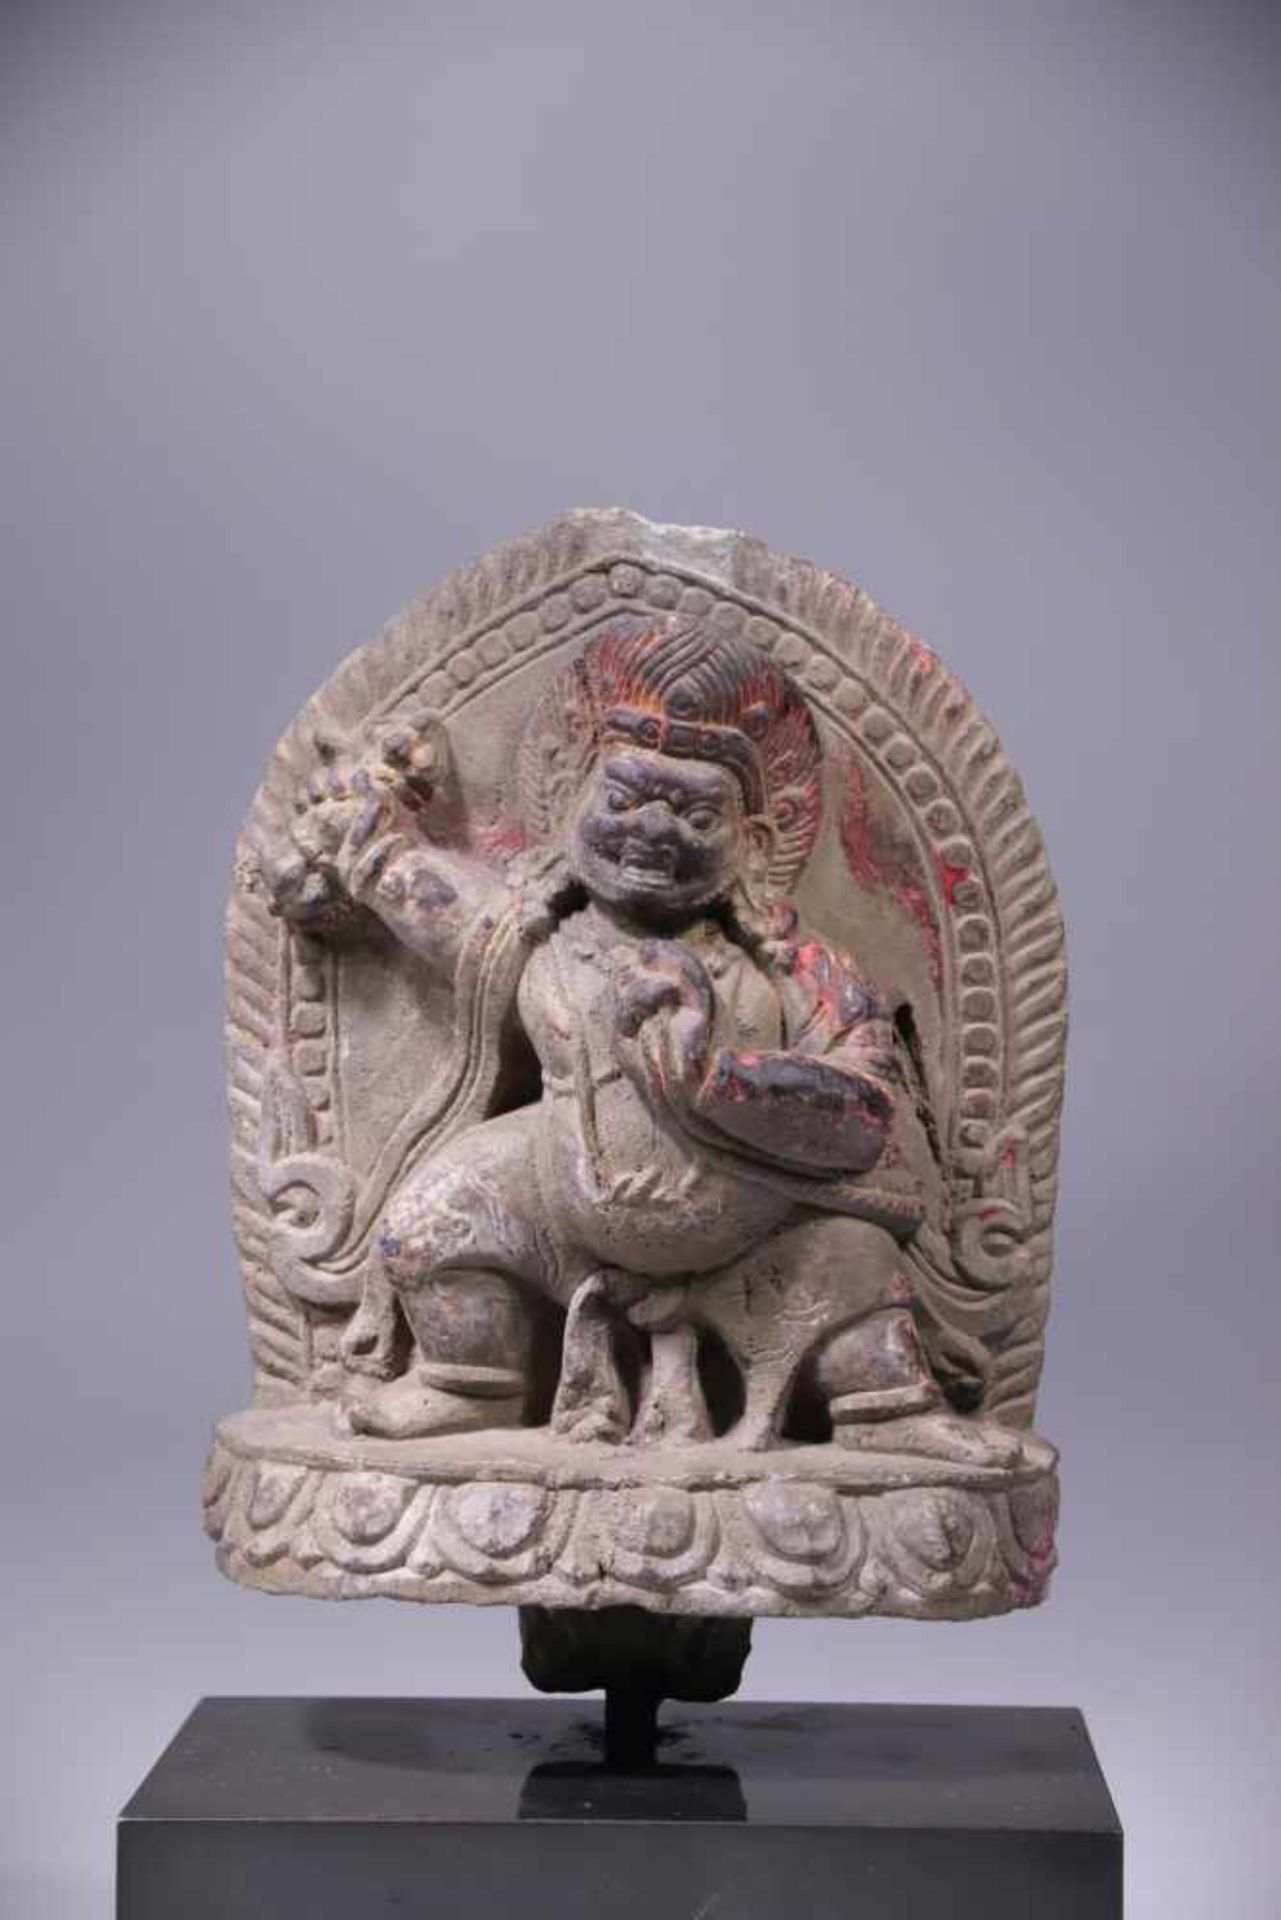 VAJRAPANIstone, Tibet or Nepal, 16th century,Size: 15 cmWrathful Vajrapani standing in a lunge